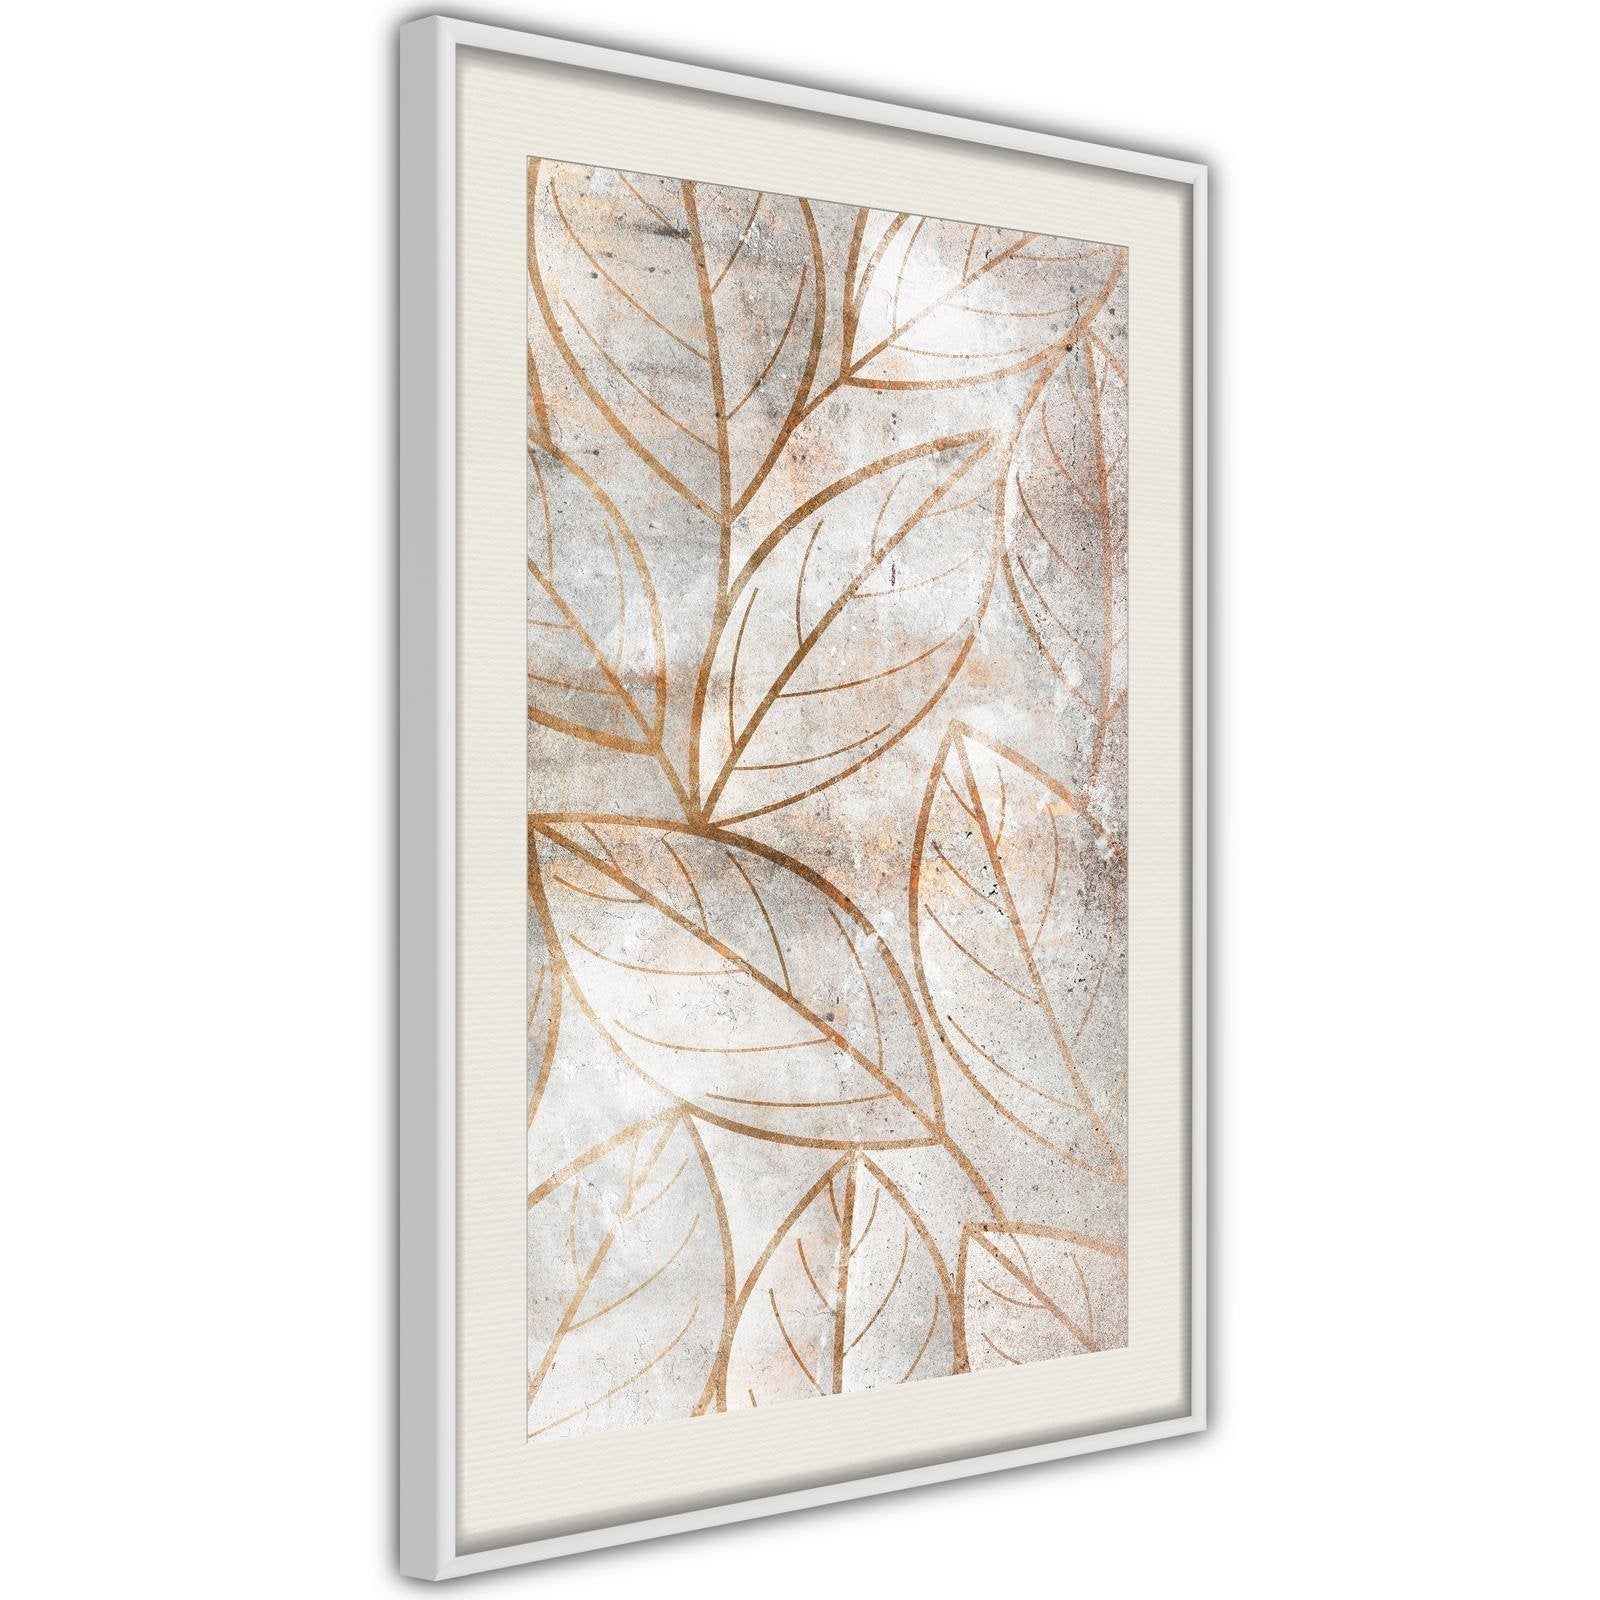 Inramad Poster / Tavla - Copper Leaves-Poster Inramad-Artgeist-peaceofhome.se